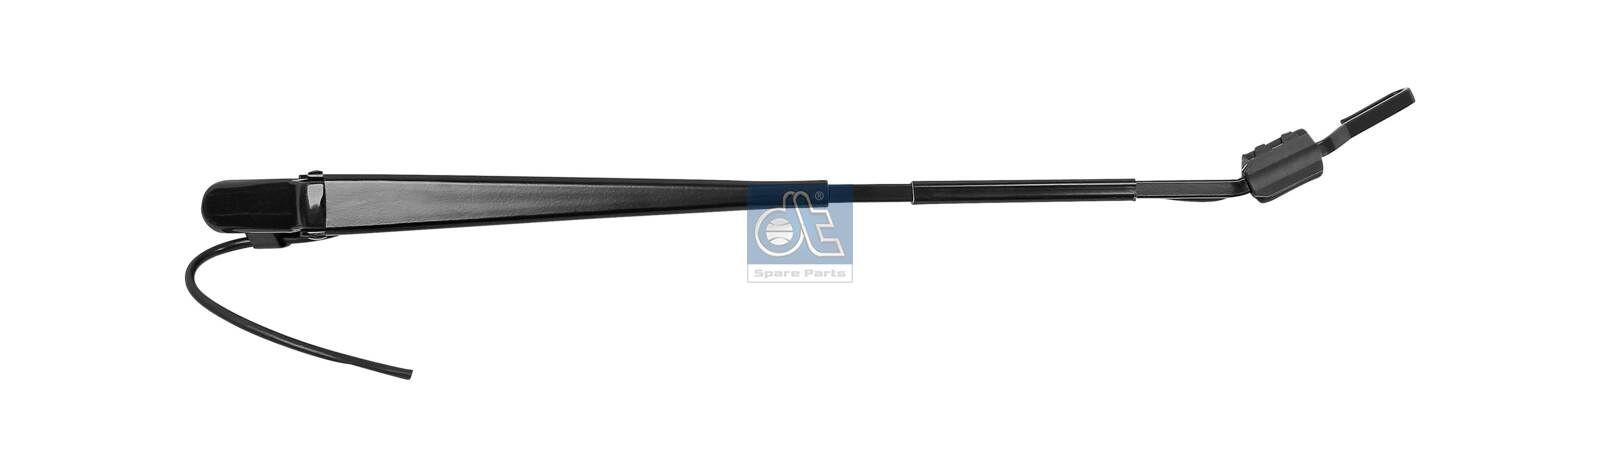 DT Spare Parts 4.63610 Wiper Arm, windscreen washer 941 820 07 44